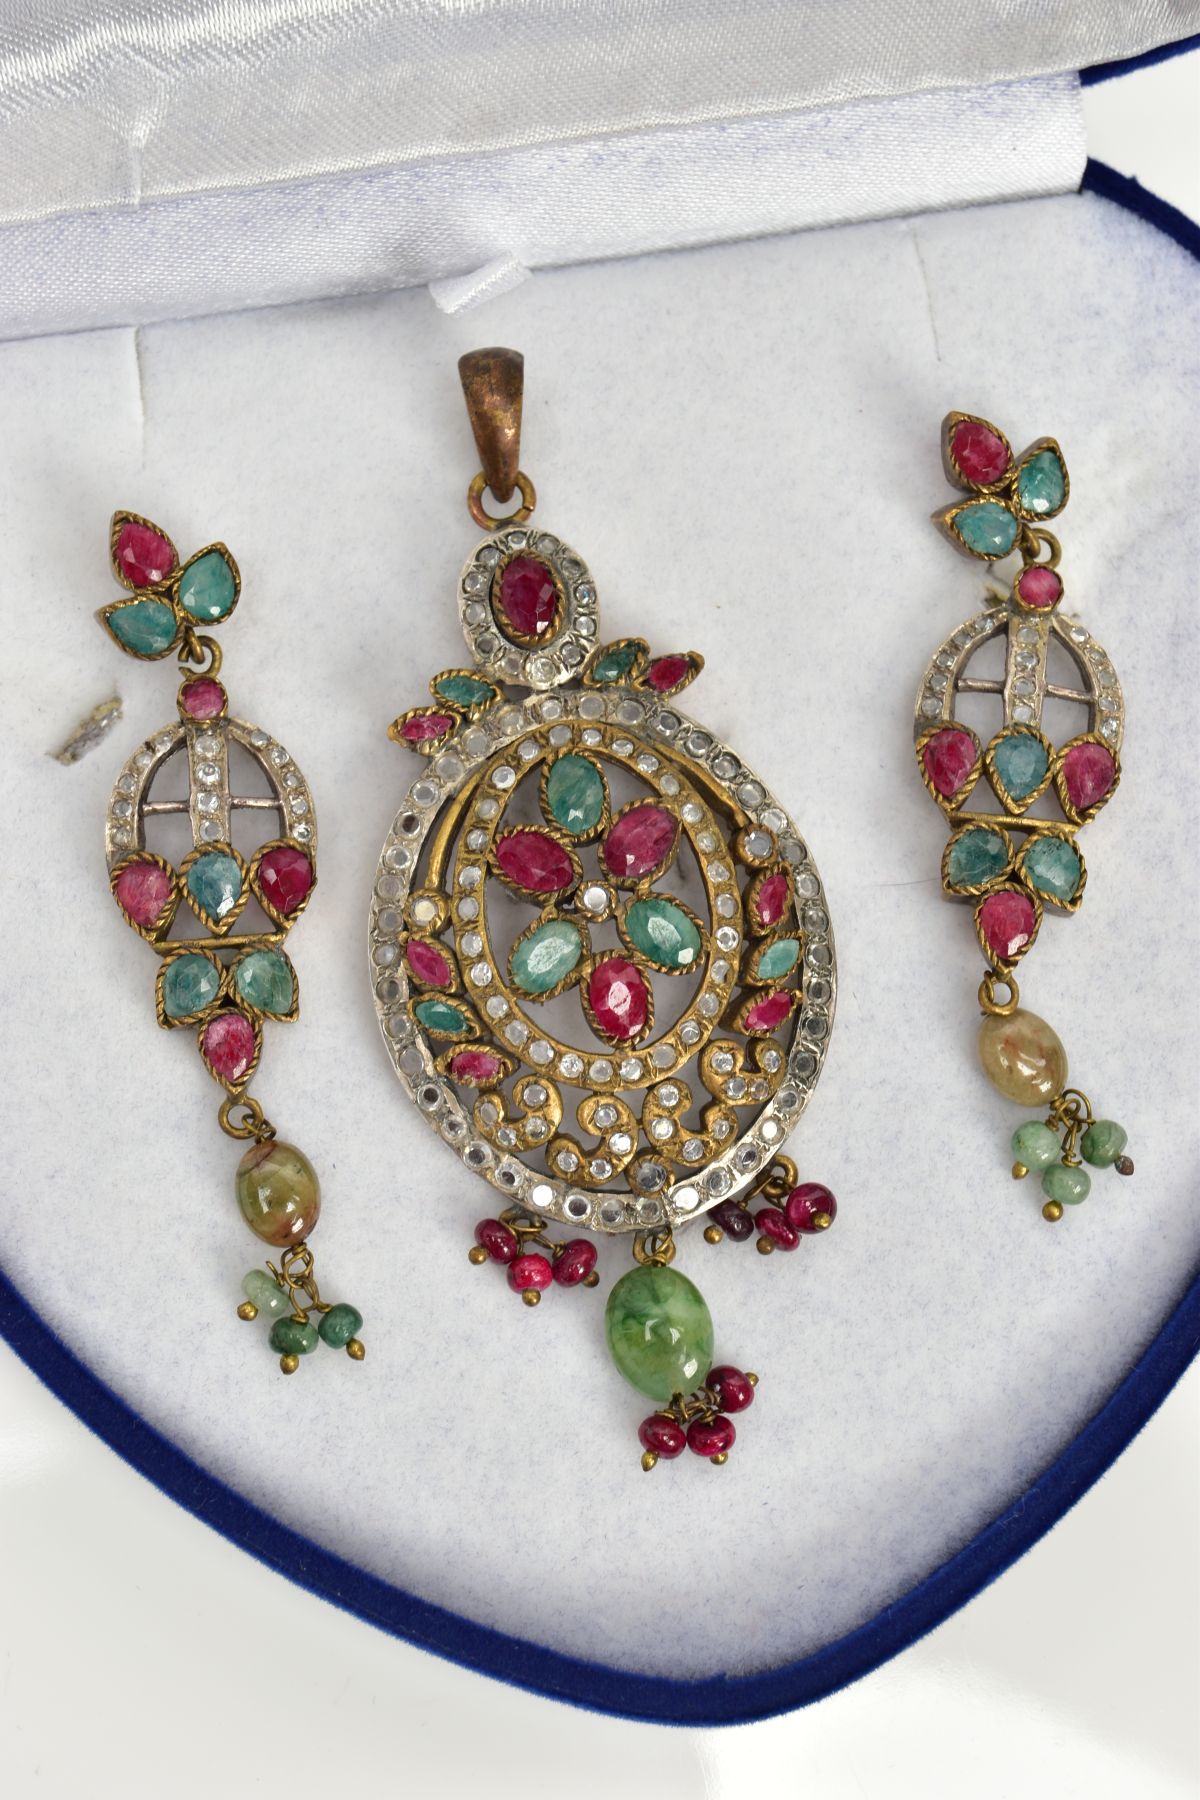 A GEM SET PENDANT AND MATCHING EARRINGS, each drop earring is set with low quality dyed red and